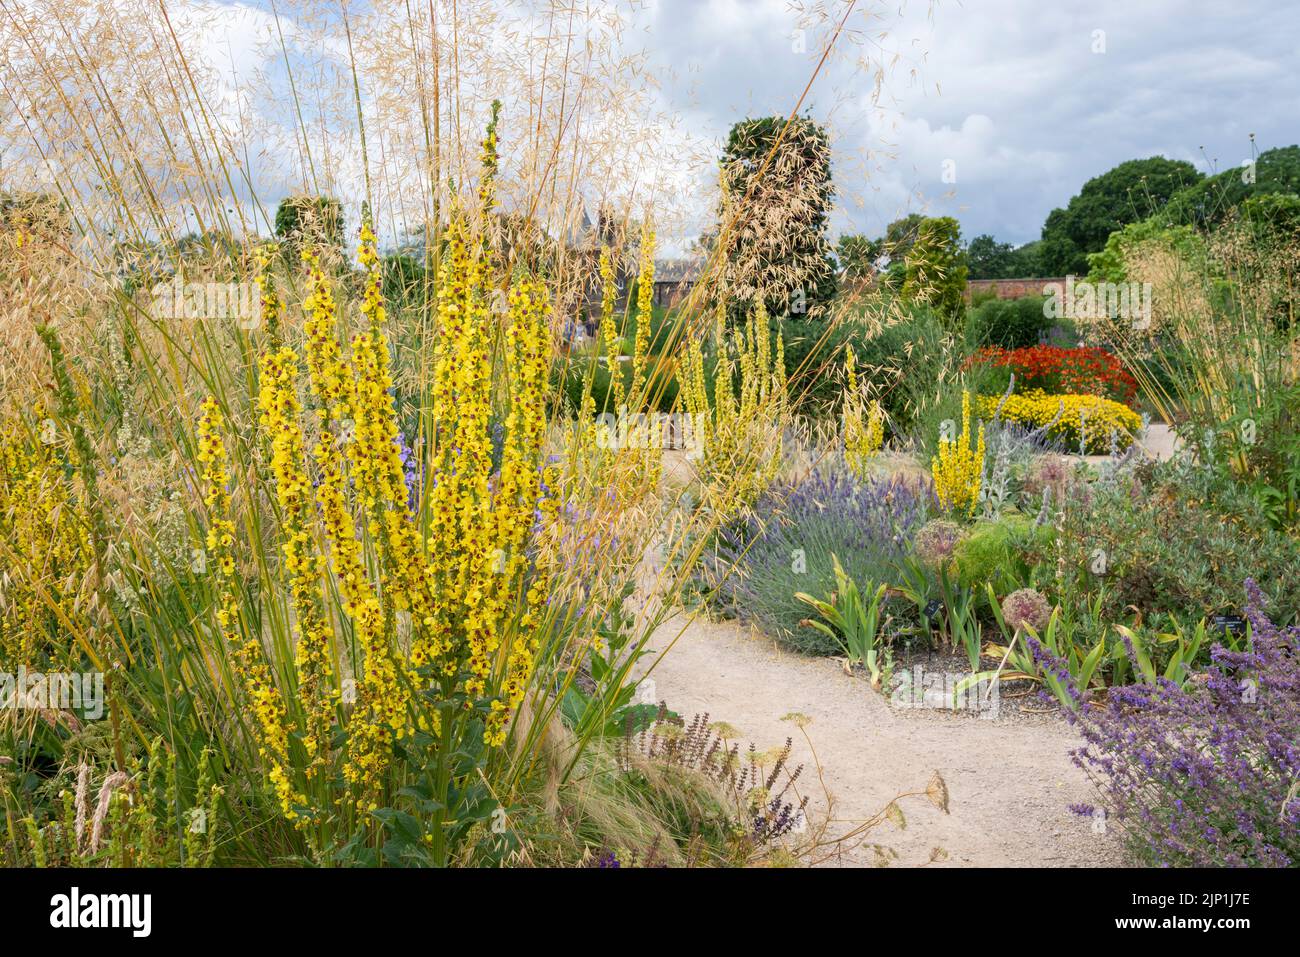 Verbascum and Stipa Gigantea in the Paradise garden at RHS Bridgewater, Worsley, Greater Manchester, England. Stock Photo